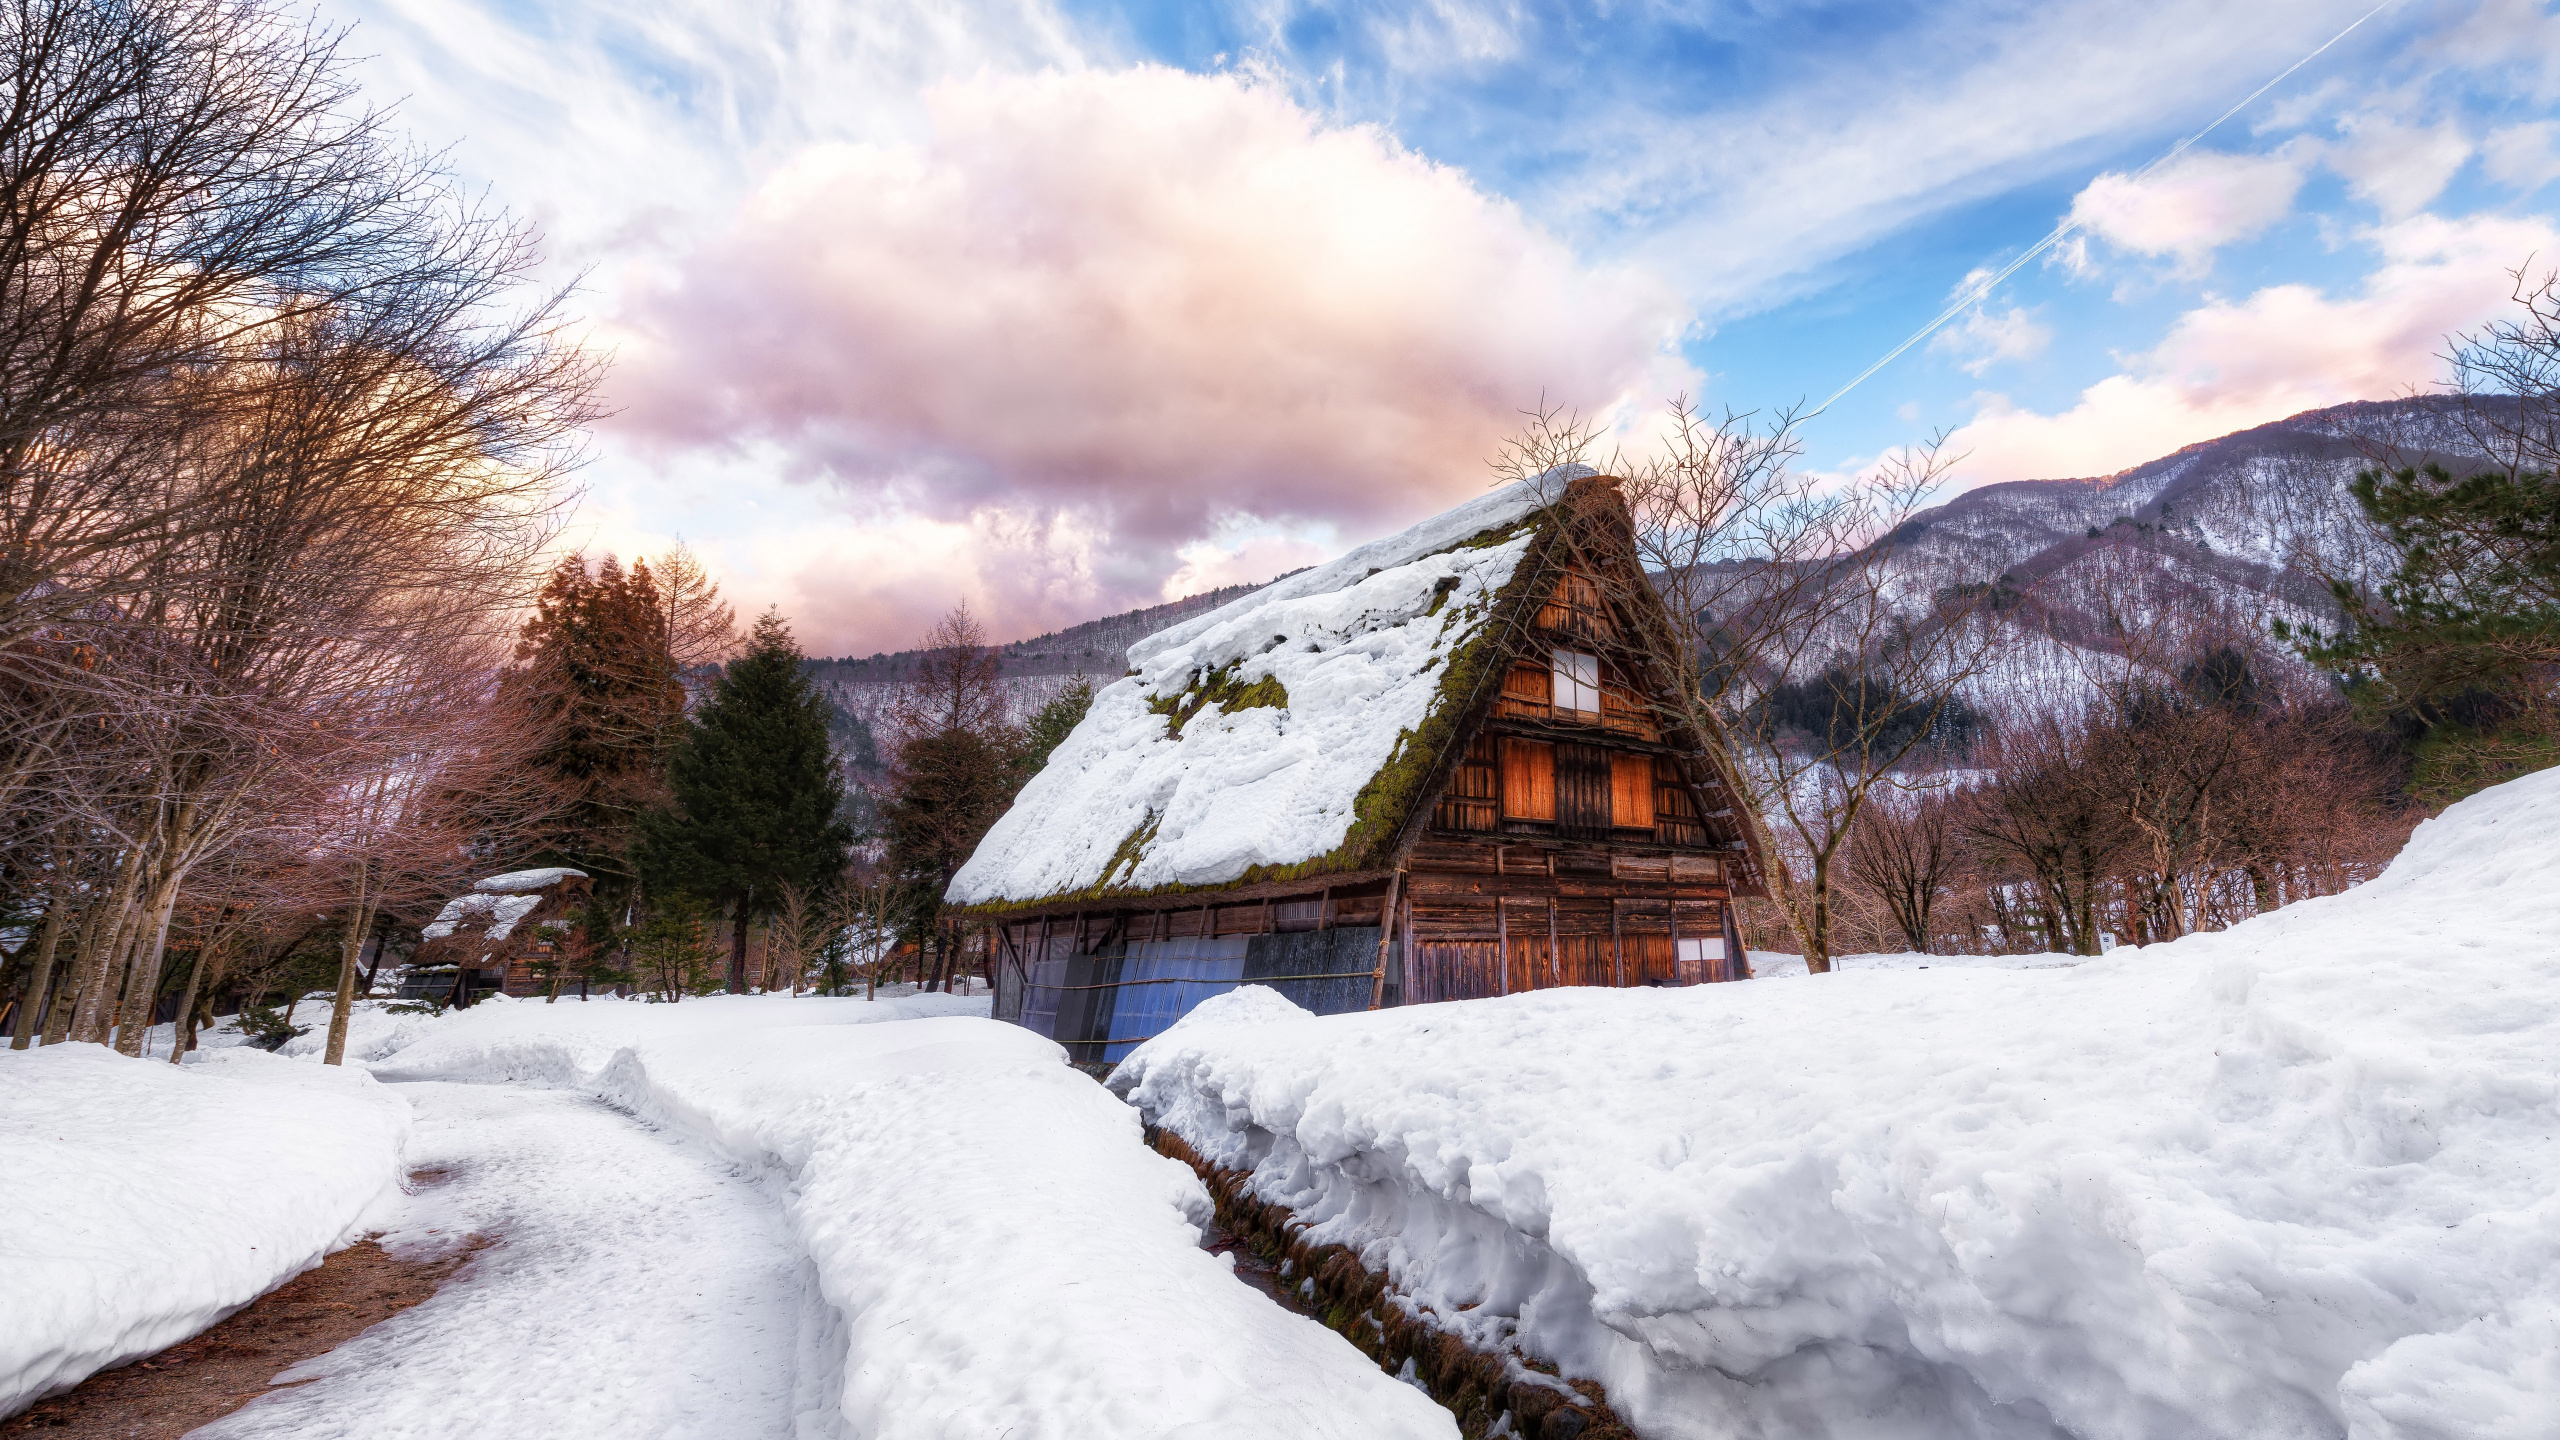 Brown Wooden House on Snow Covered Ground Under White Clouds and Blue Sky During Daytime. Wallpaper in 2560x1440 Resolution